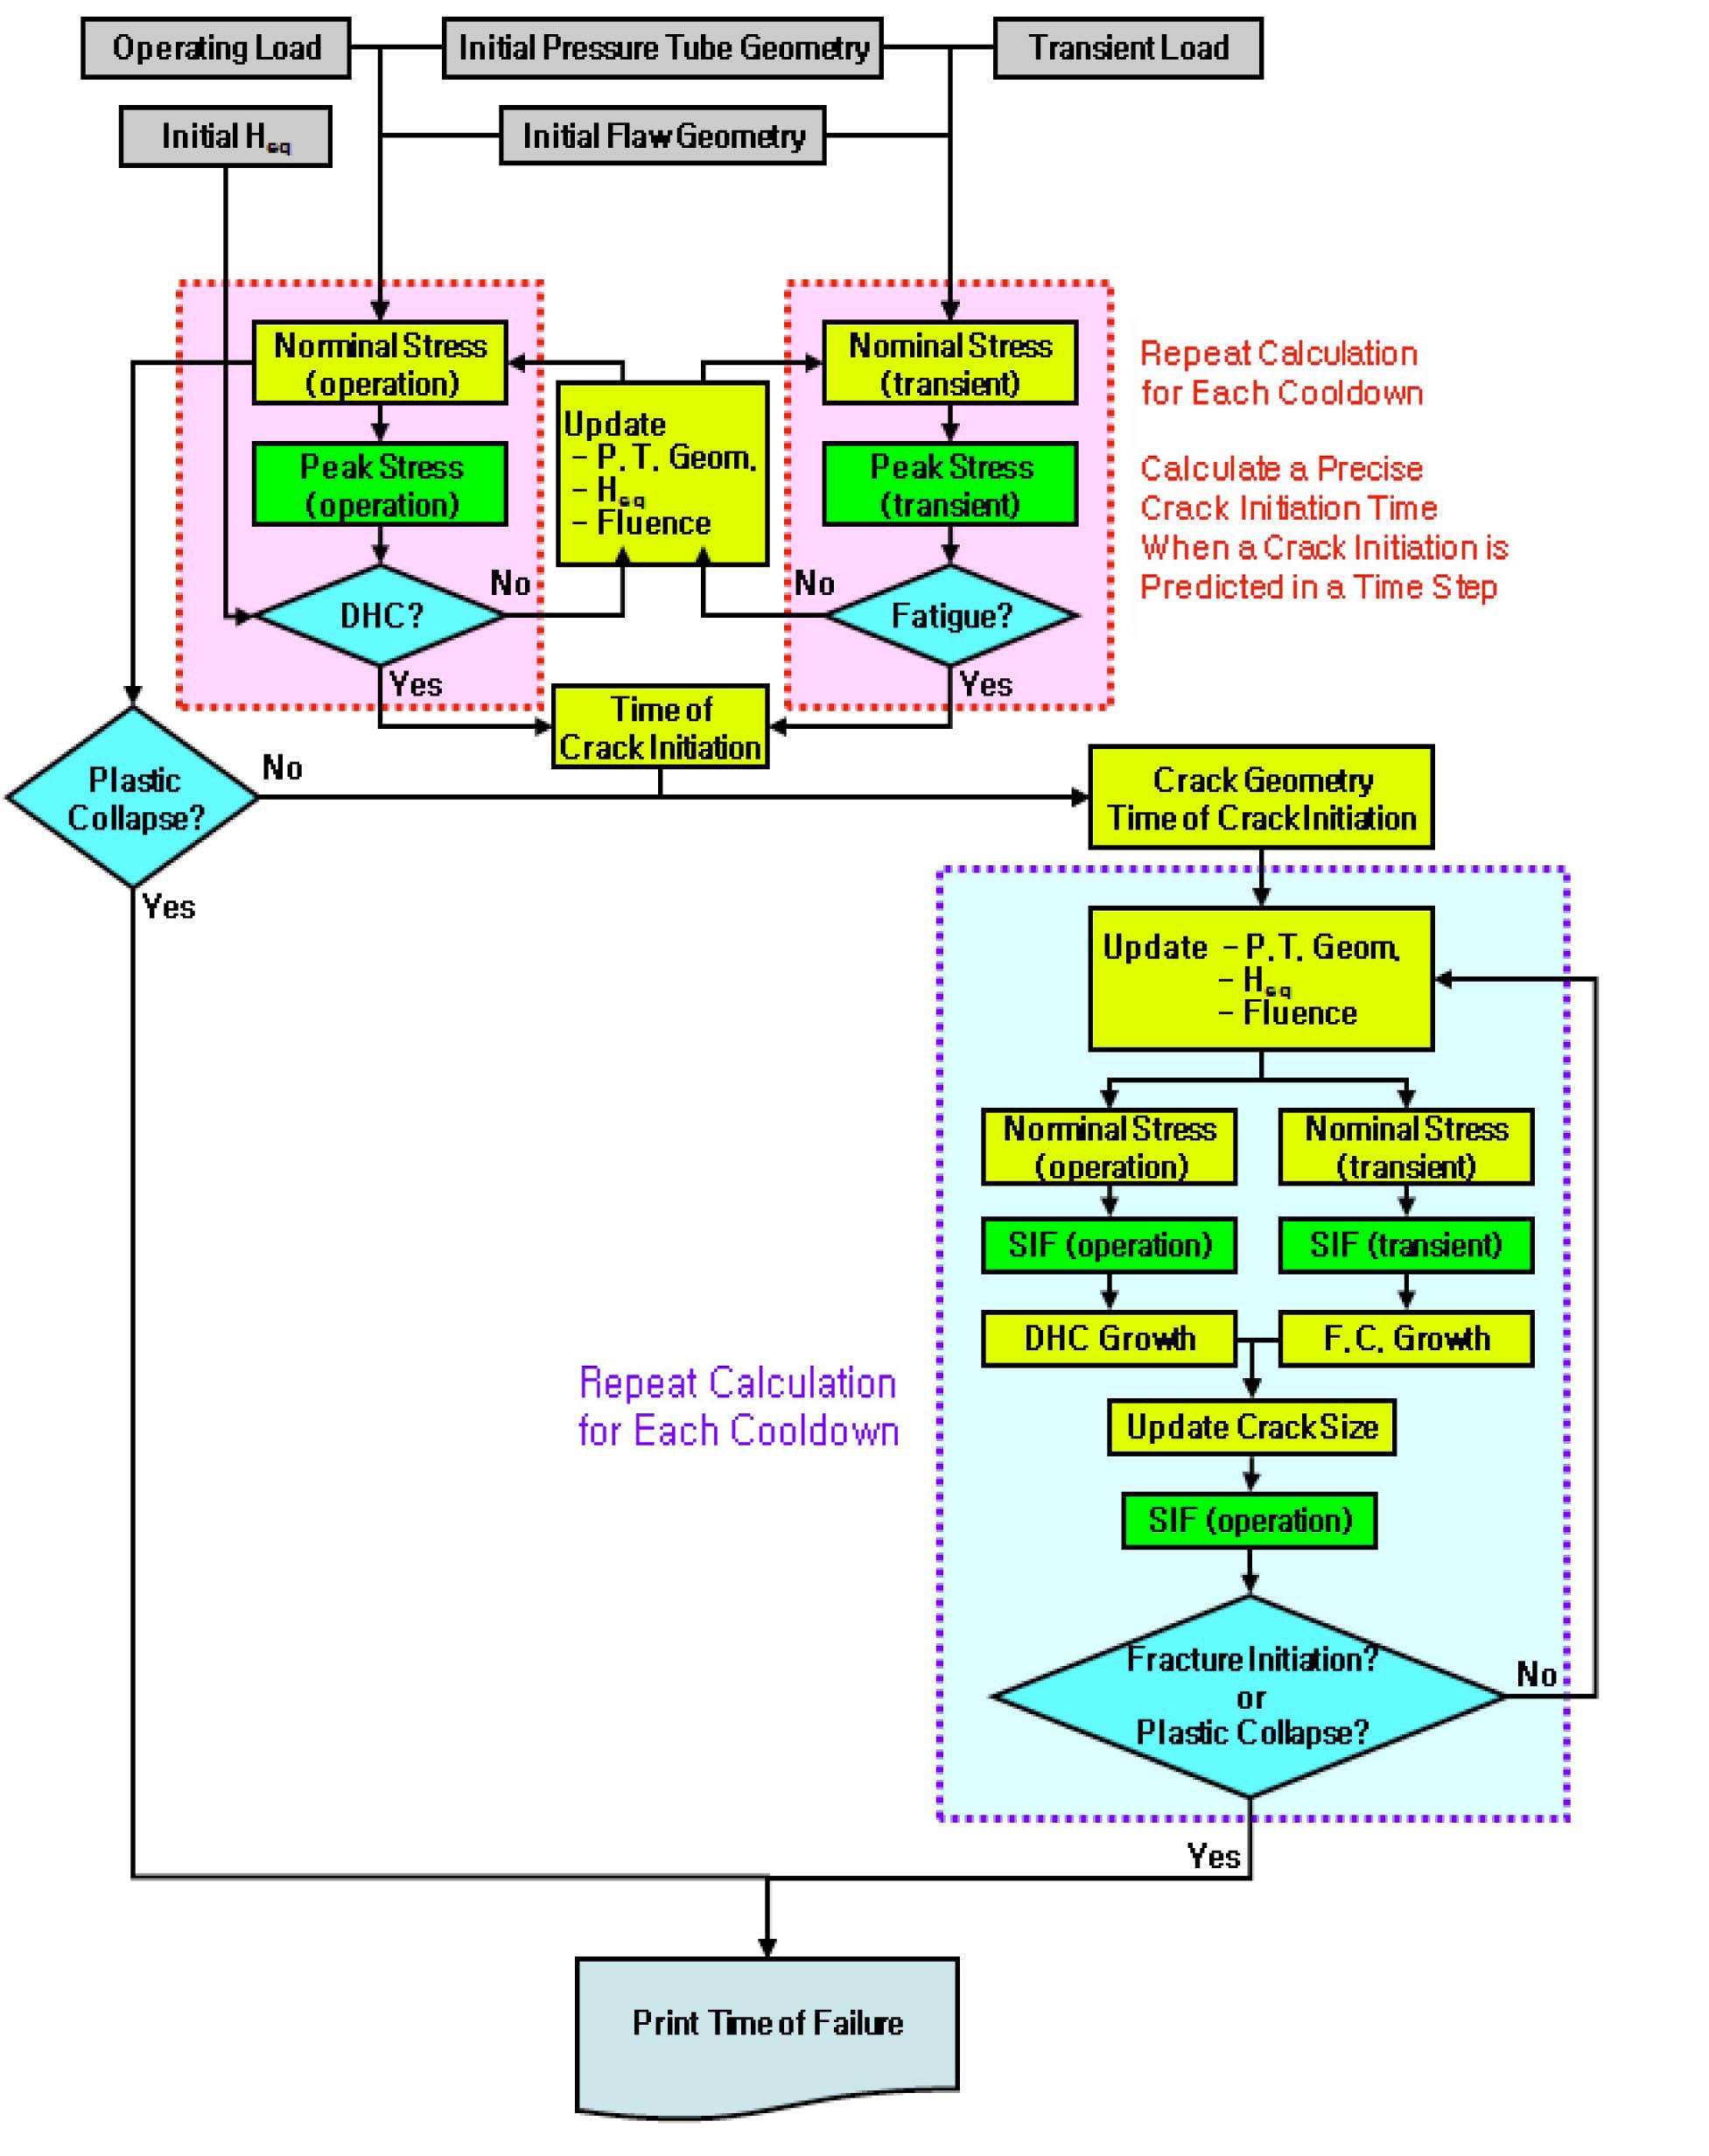 Flow Diagram of Deterministic Flaw Assessment for PHWR Pressure Tubes